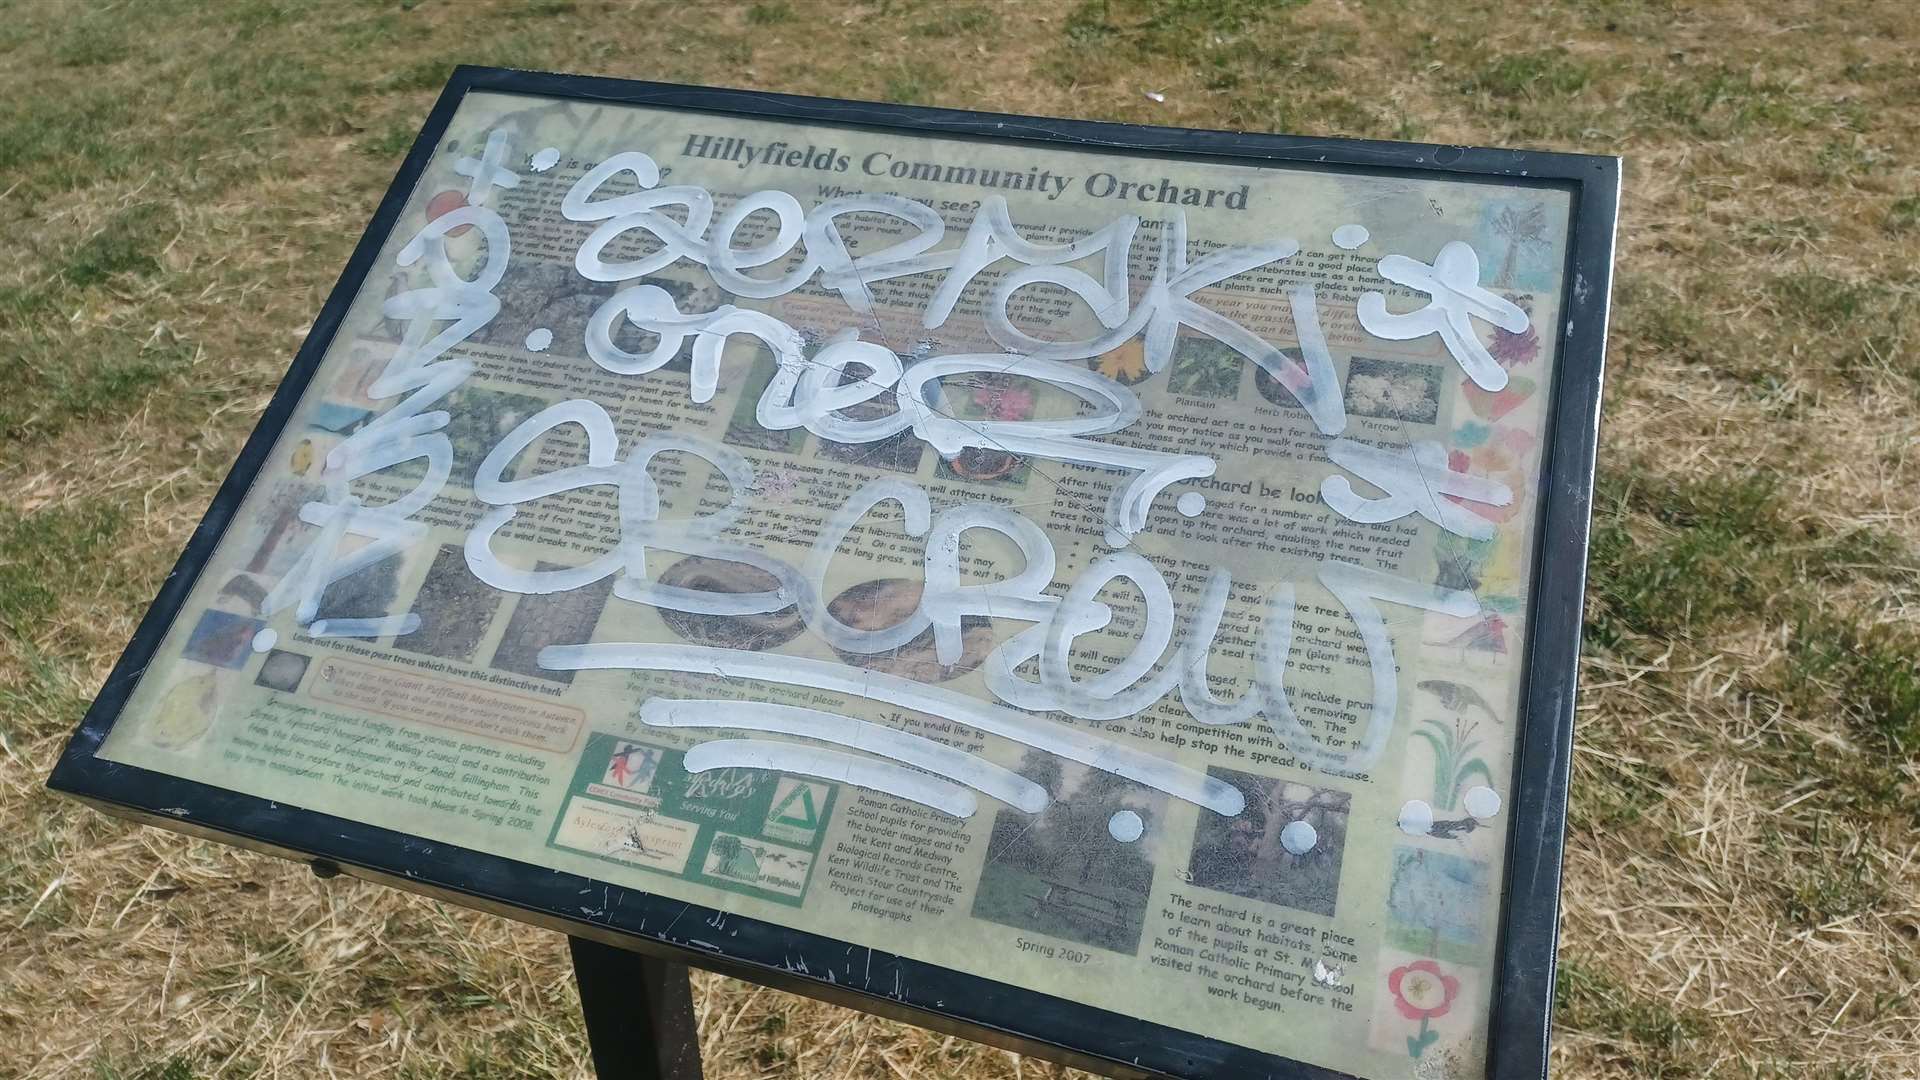 Some of the graffiti at Hillyfields Community Park in Gillingham